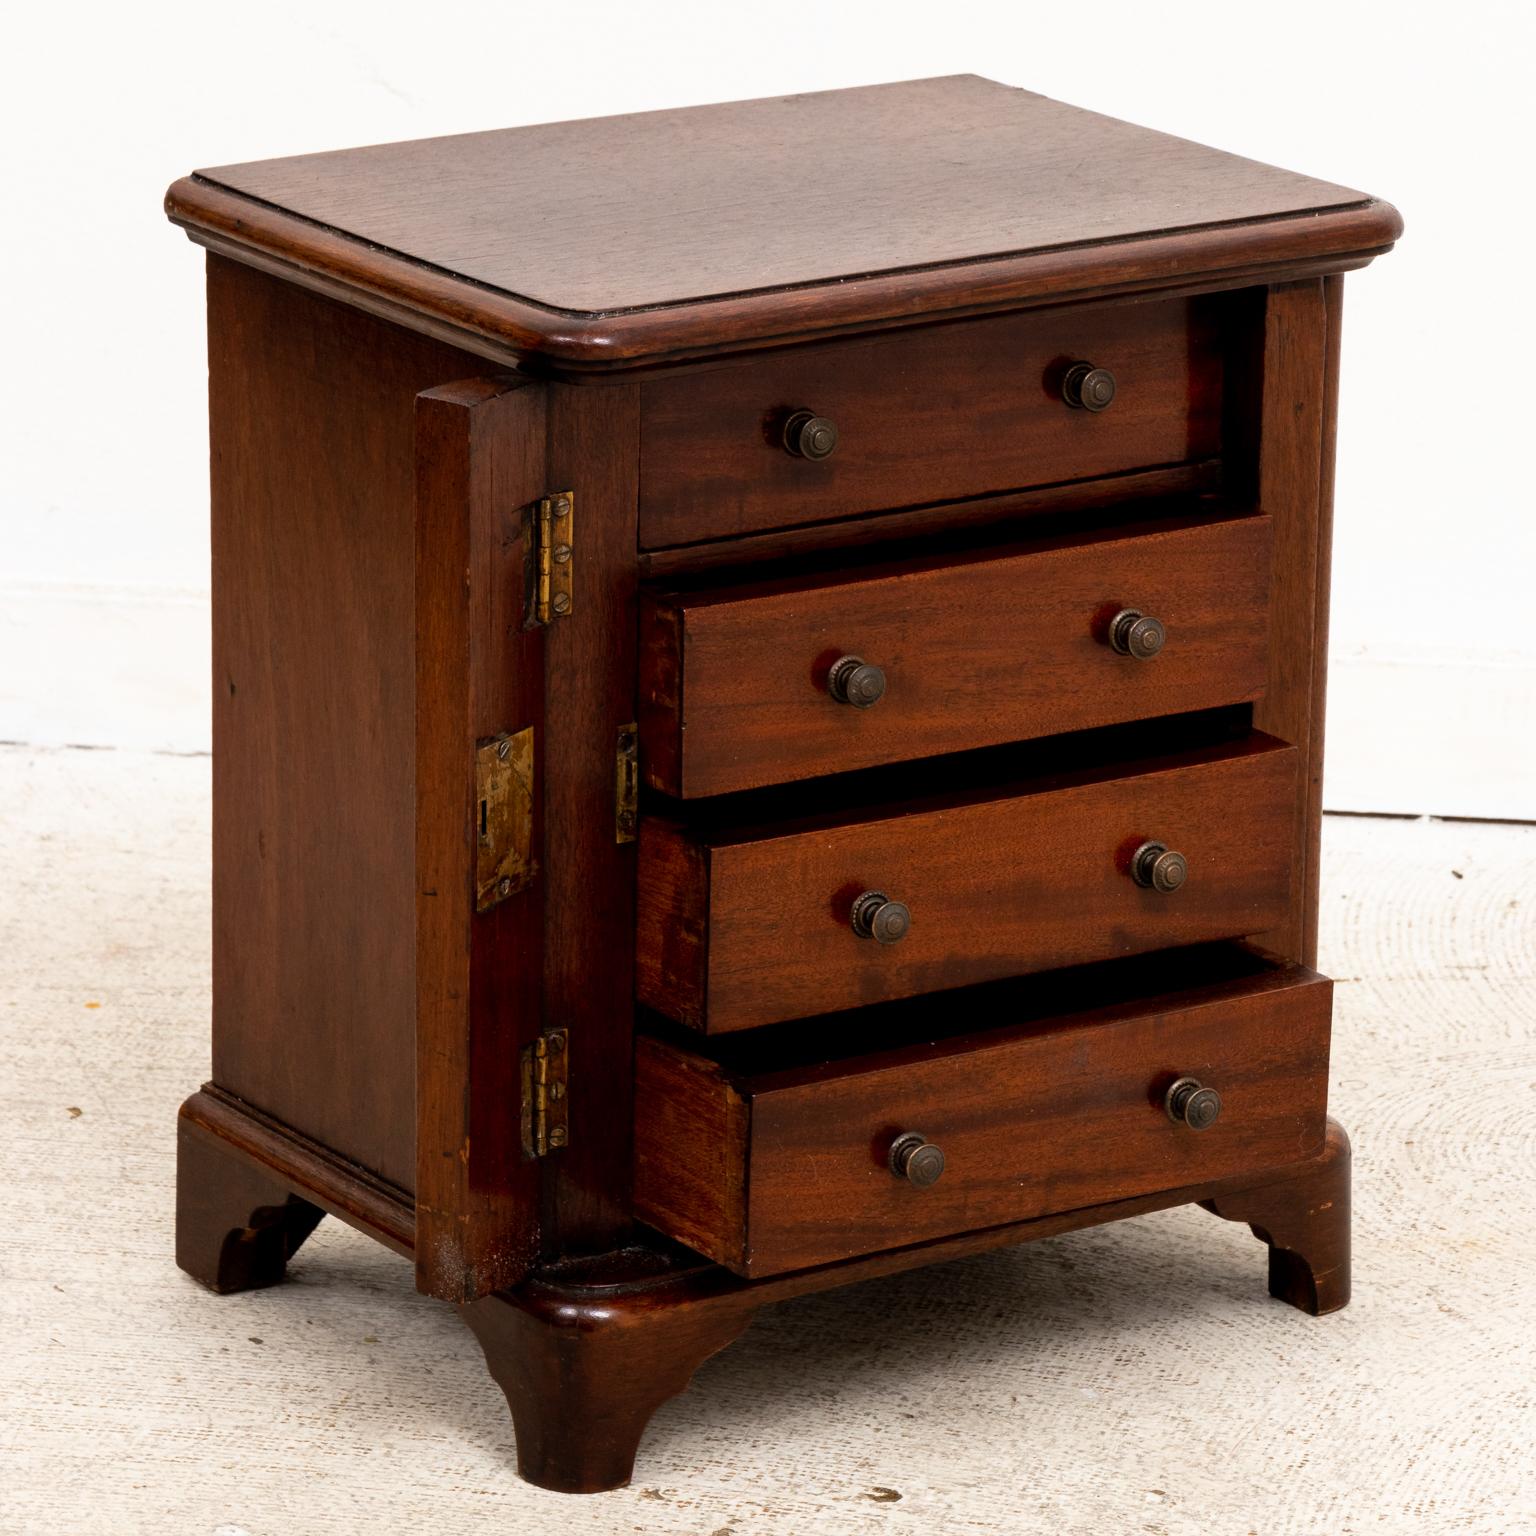 Circa 1840s Lockside four drawer salesman's sample size mahogany chest with key. Made in England in the 19th century and crafted for portable use. Please note of wear consistent with age.